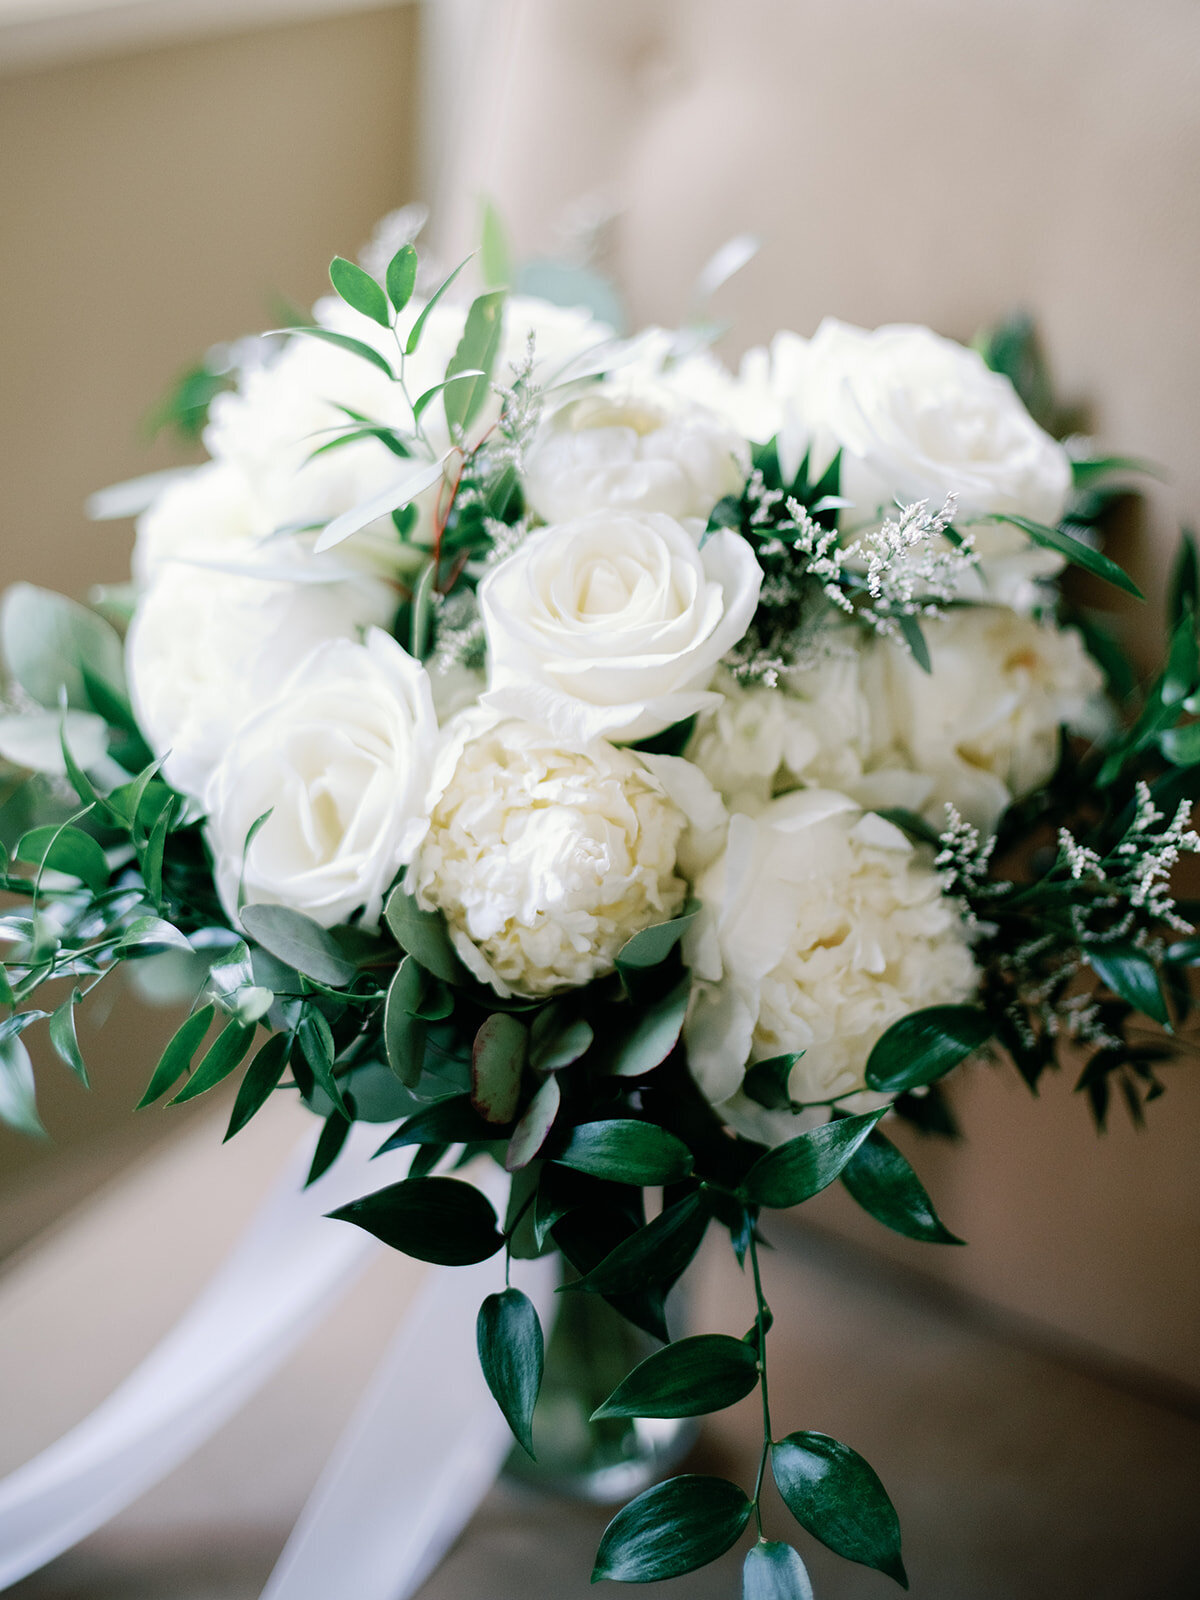 A white bouquet of flowers for a bride sitting on a chair.